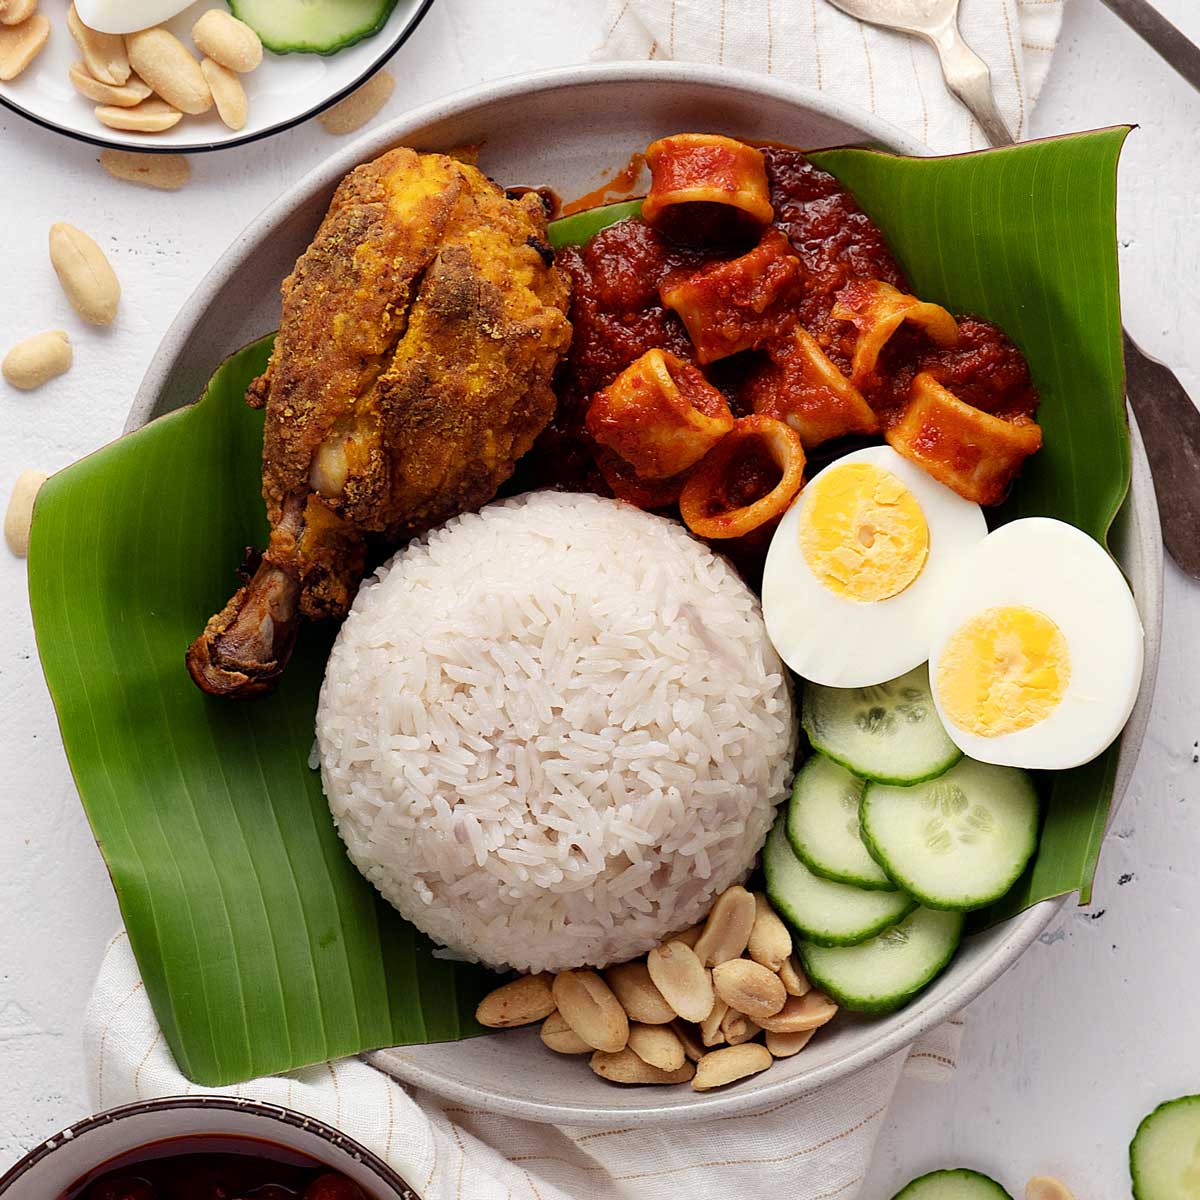 https://s6.uupload.ir/files/fp-nasi-lemak-with-all-its-trimmings_6mgv.jpg